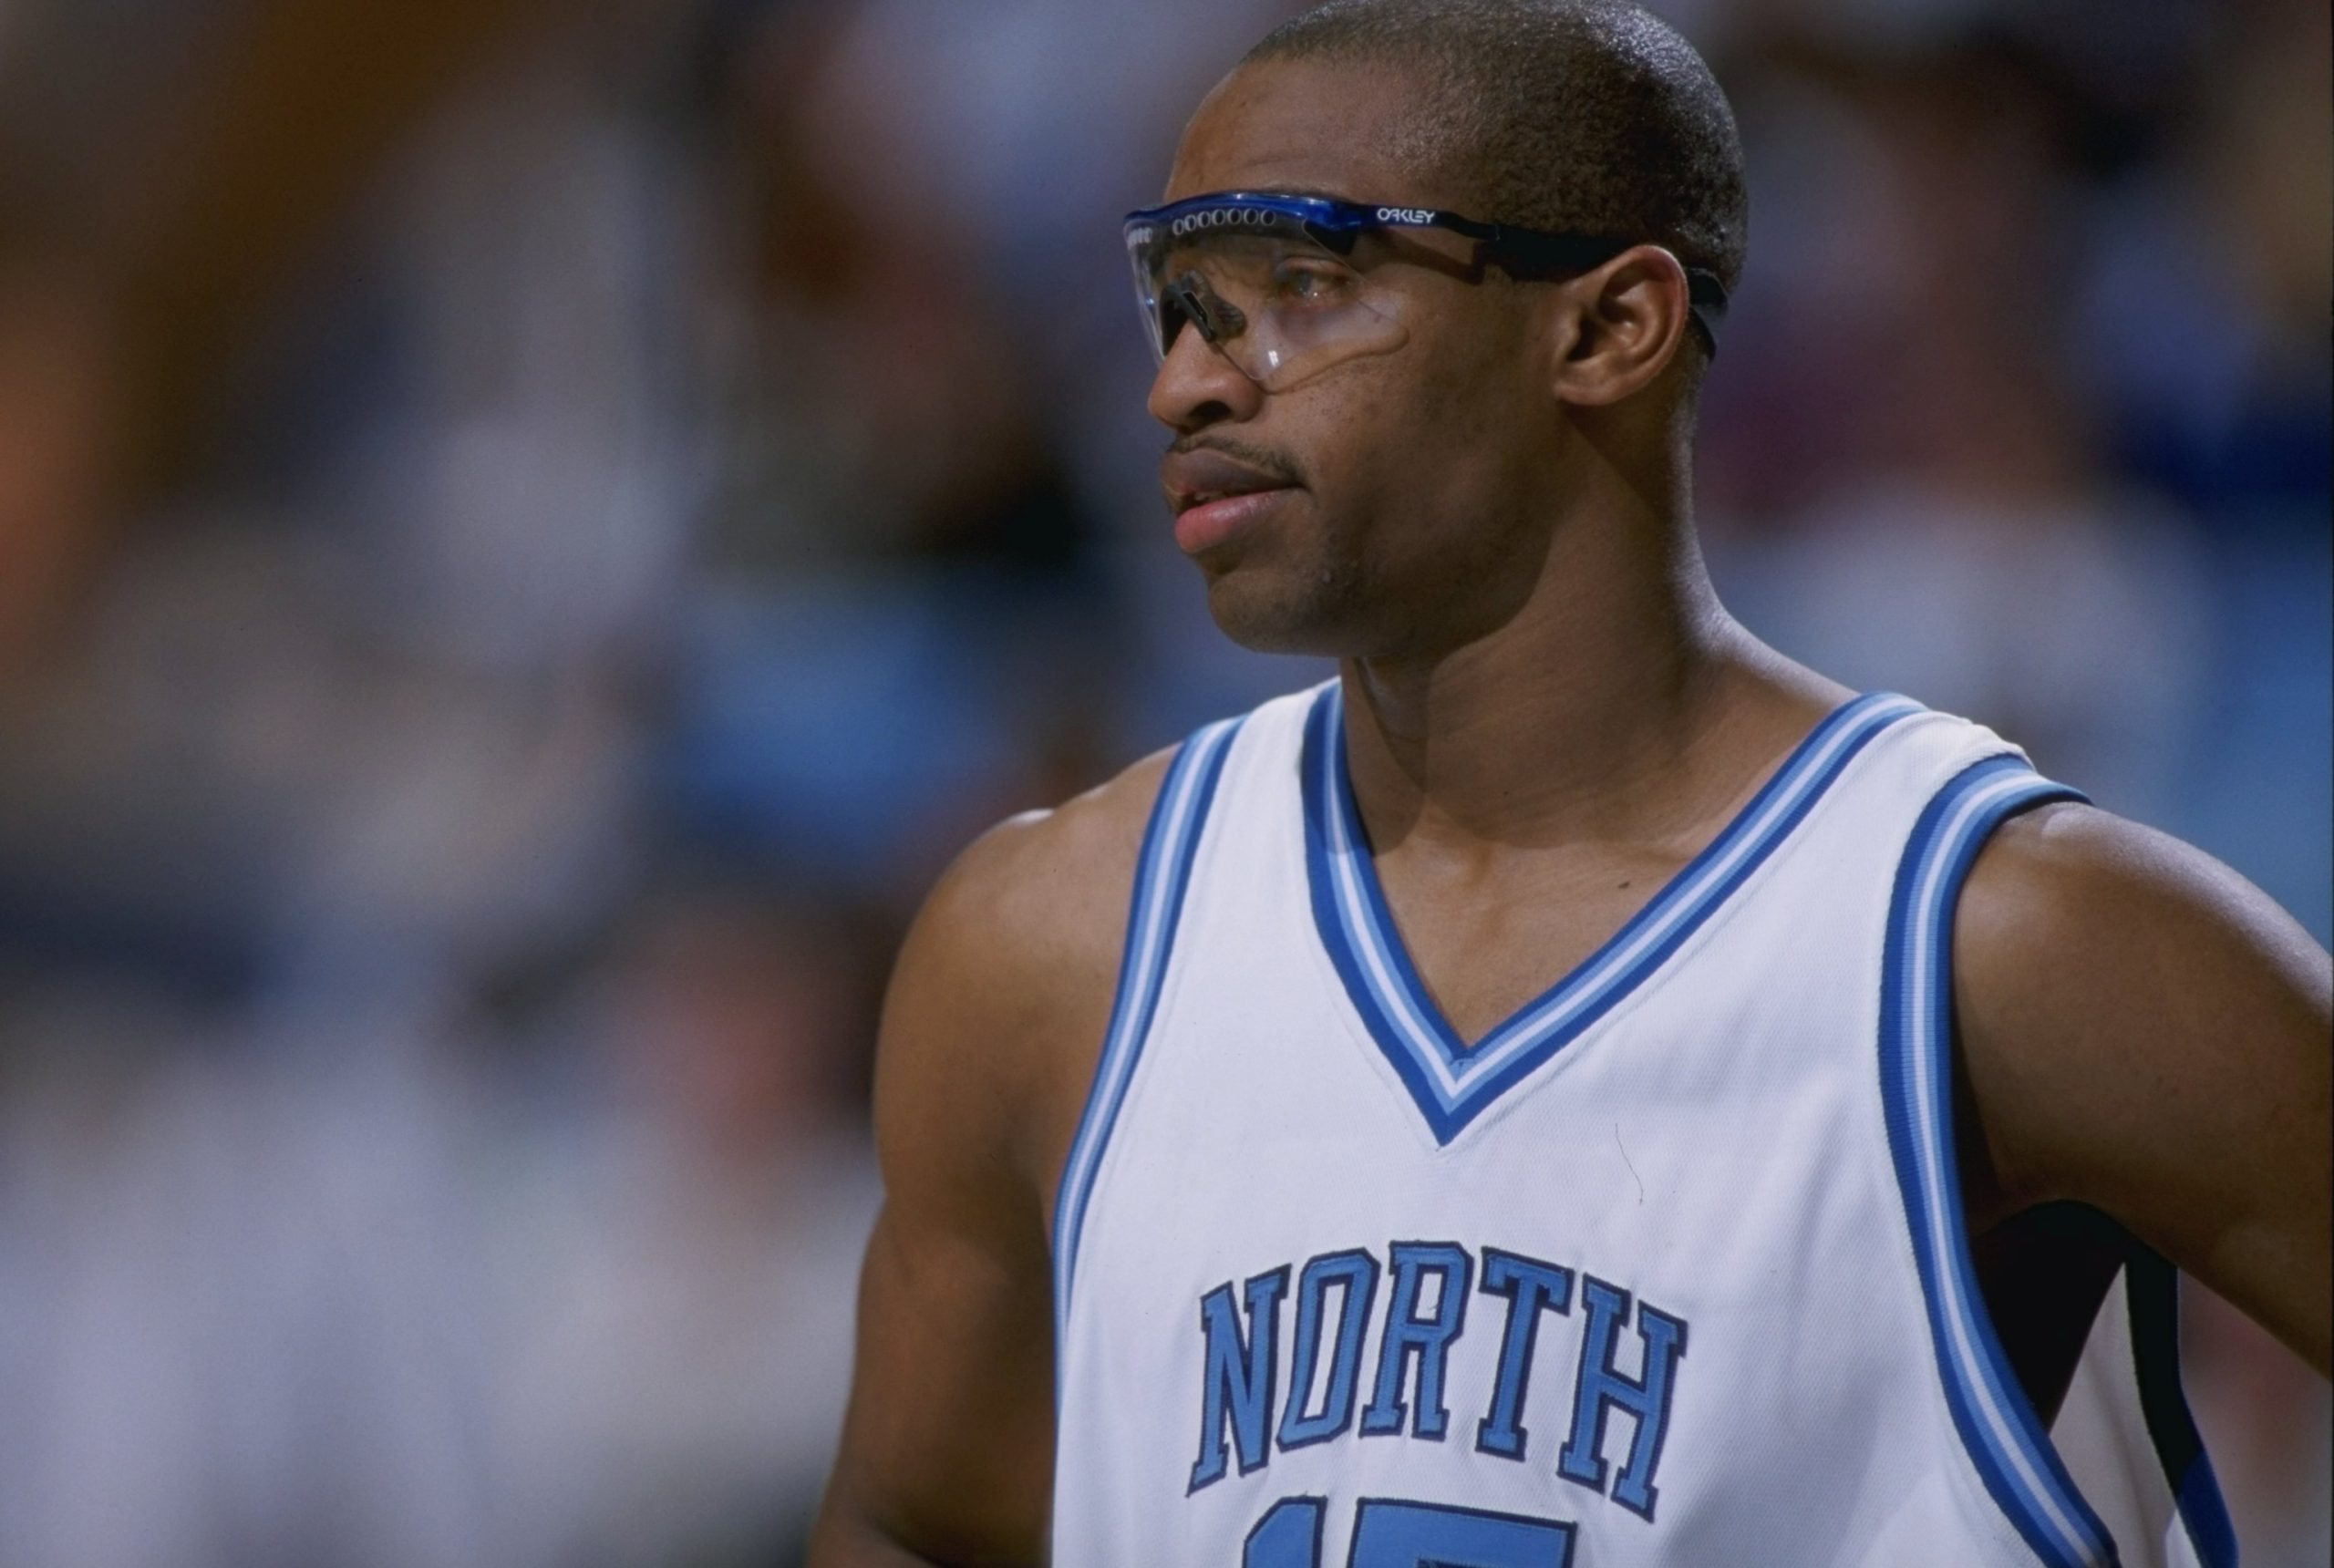 Vince Carter looks on during a North Carolina basketball game